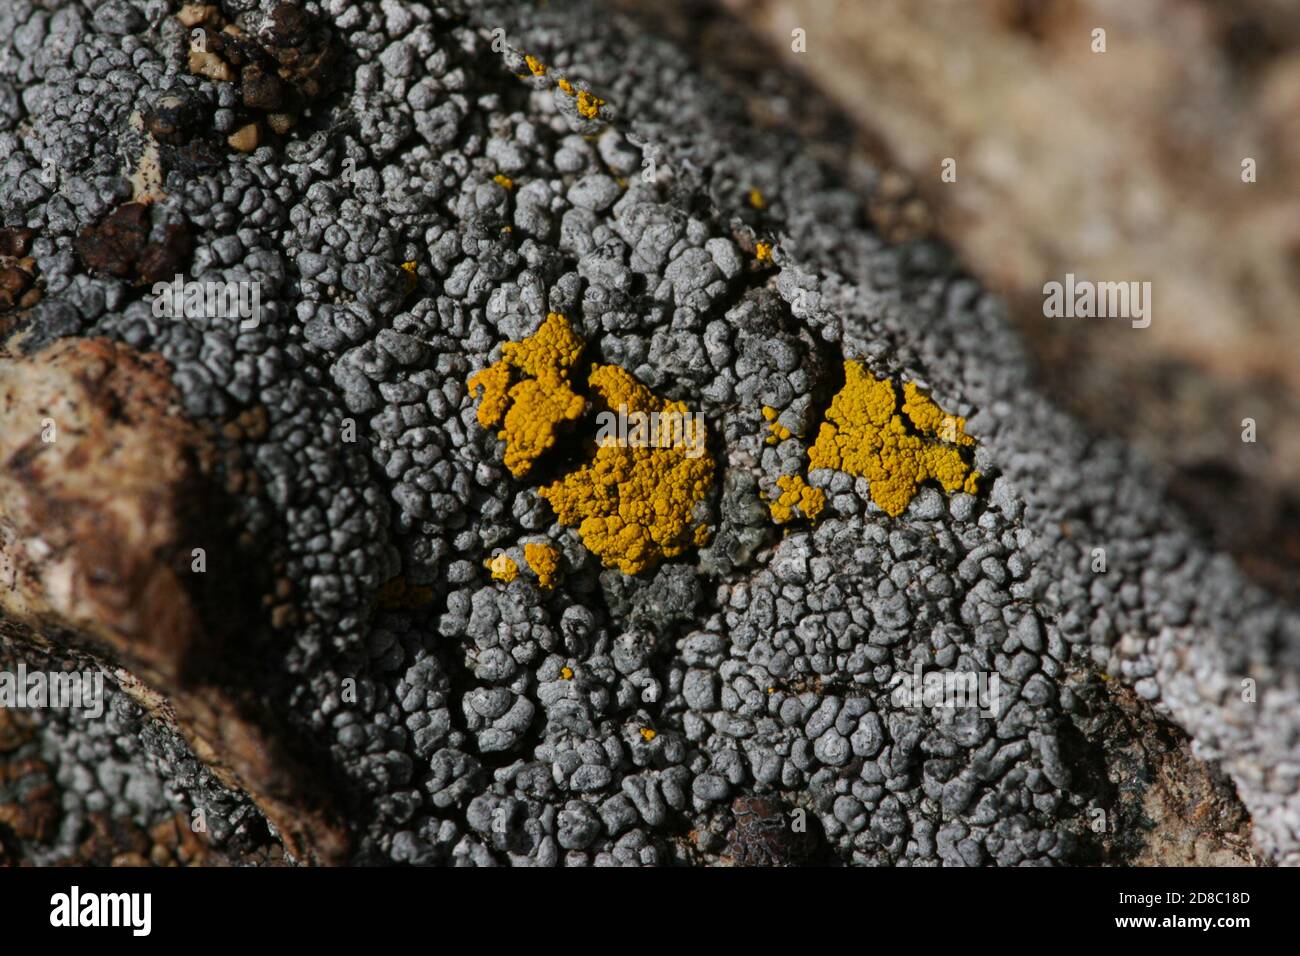 Lichen are thallophytic plantlike organisms that consist of a symbiotic association of algae or cyanobacteria and fungi. Lichens are found worldwide. Stock Photo